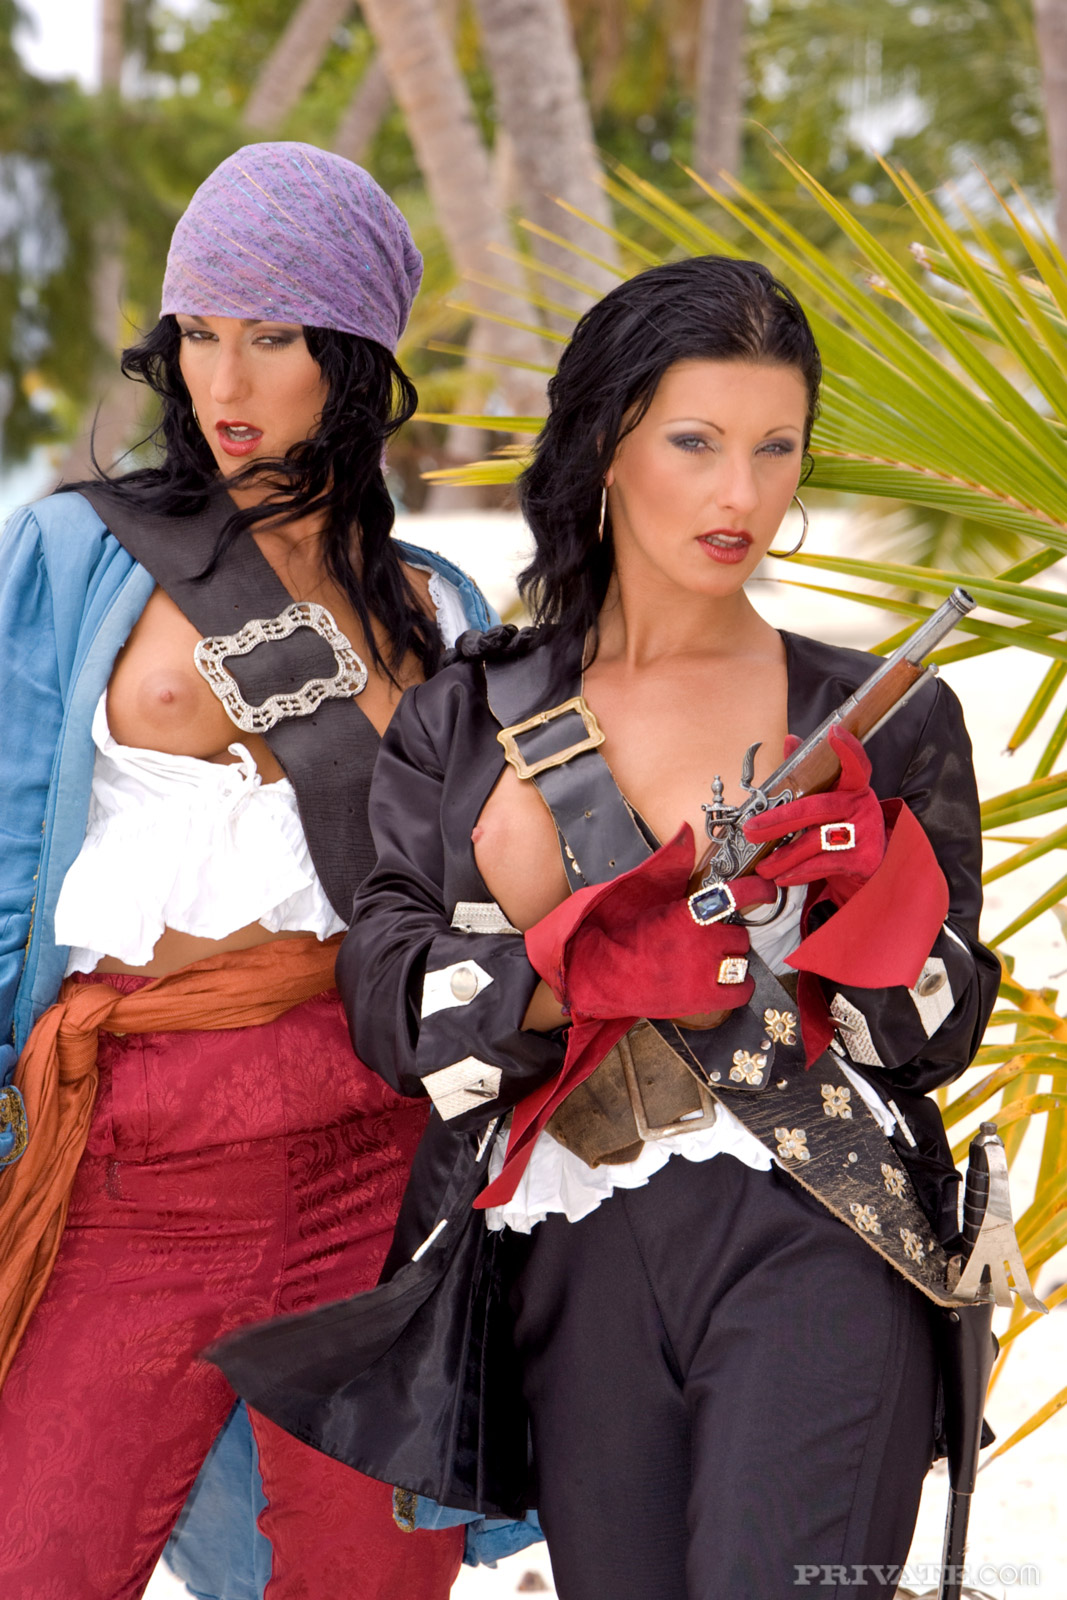 Pirate Babe Porn - amateur threesome Two naughty pirate babes get horny and dirty in an island